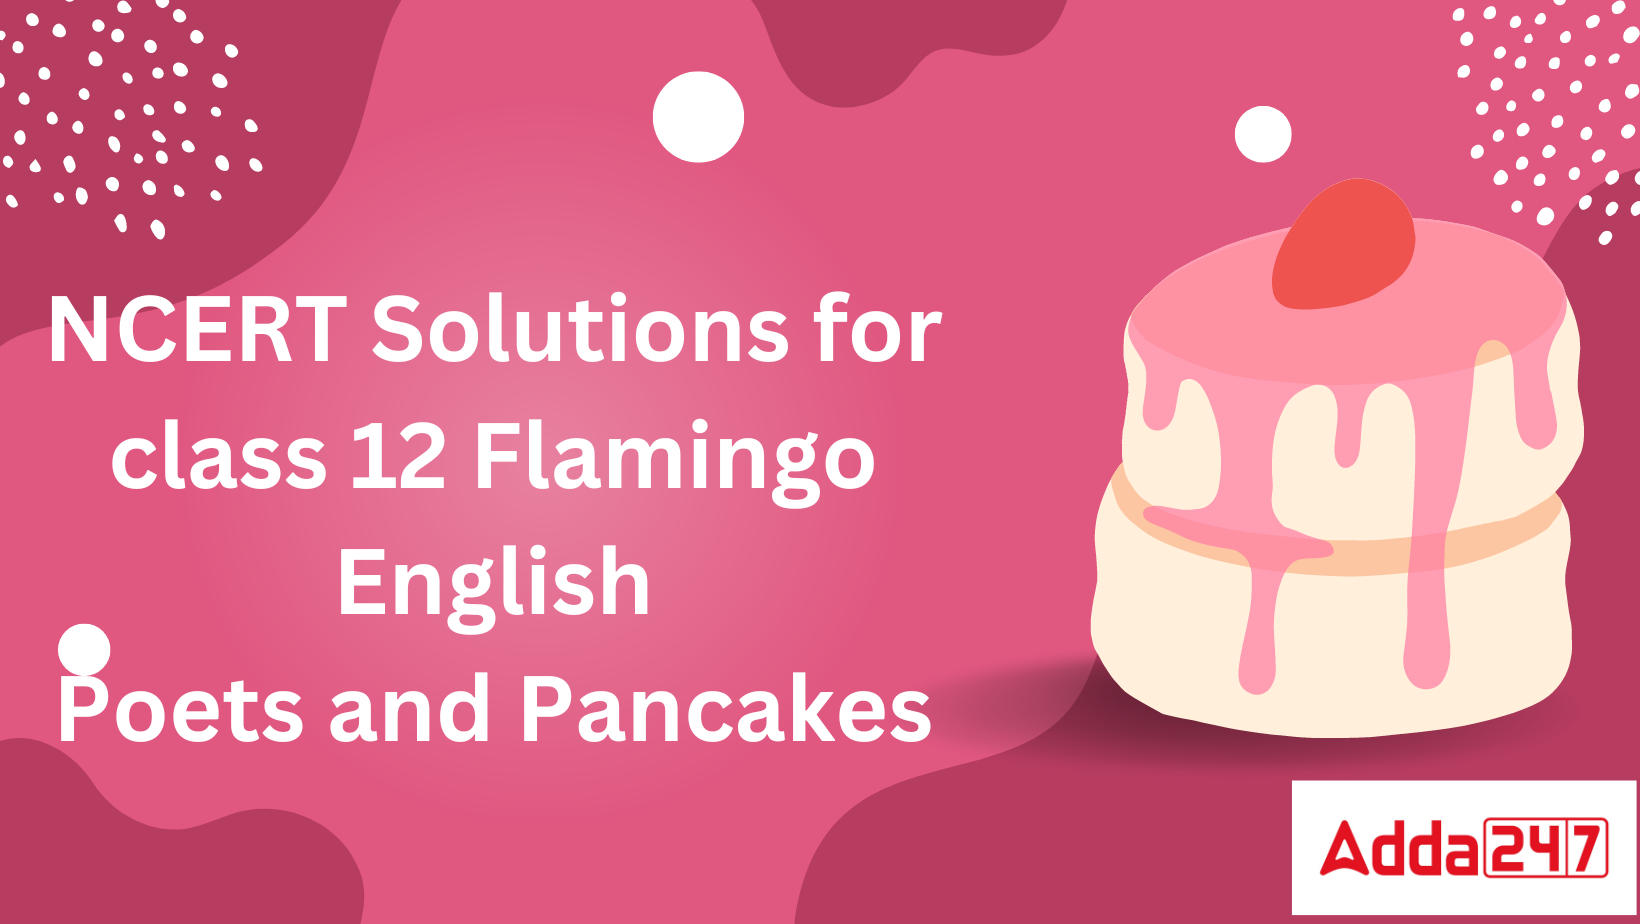 s for class 12 Flamingo English Poets and Pancakes (1)